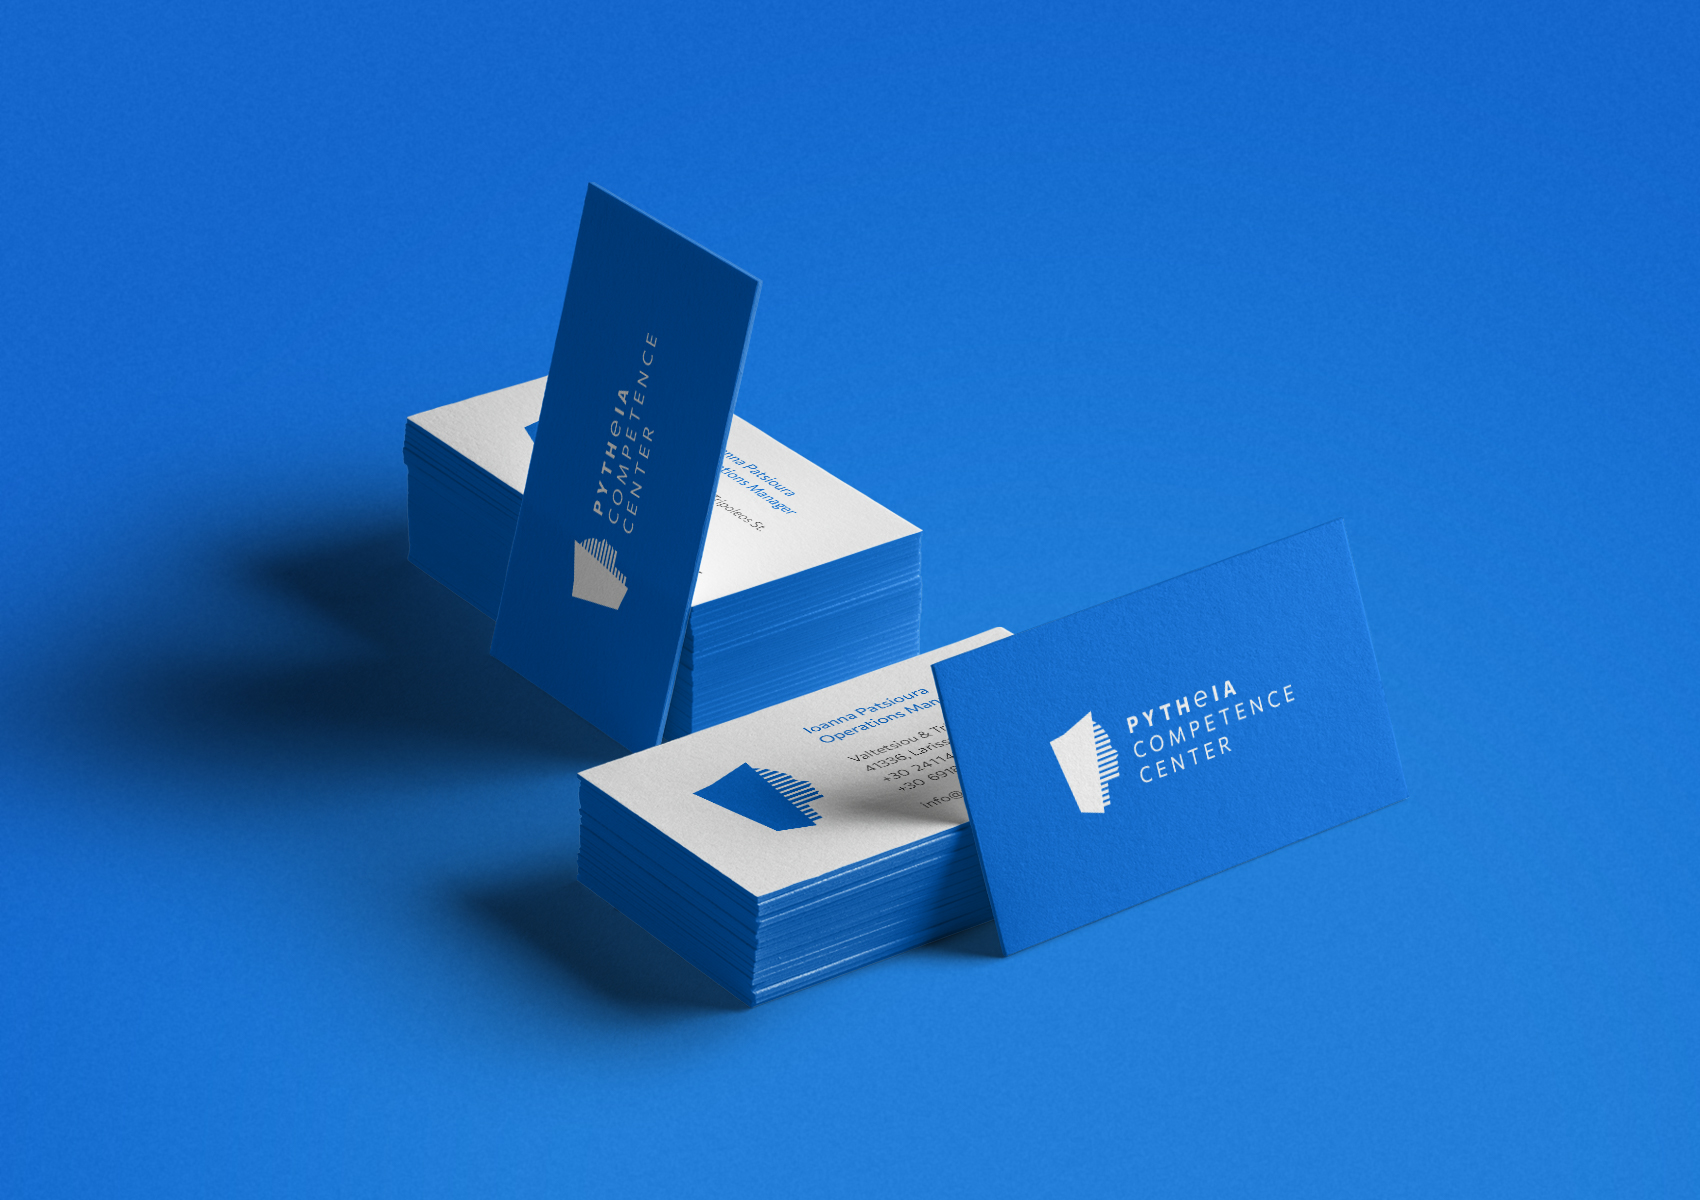 PYTHeIA_Competence_Center_business_cards_1700x1200_by_xhristakis.jpg